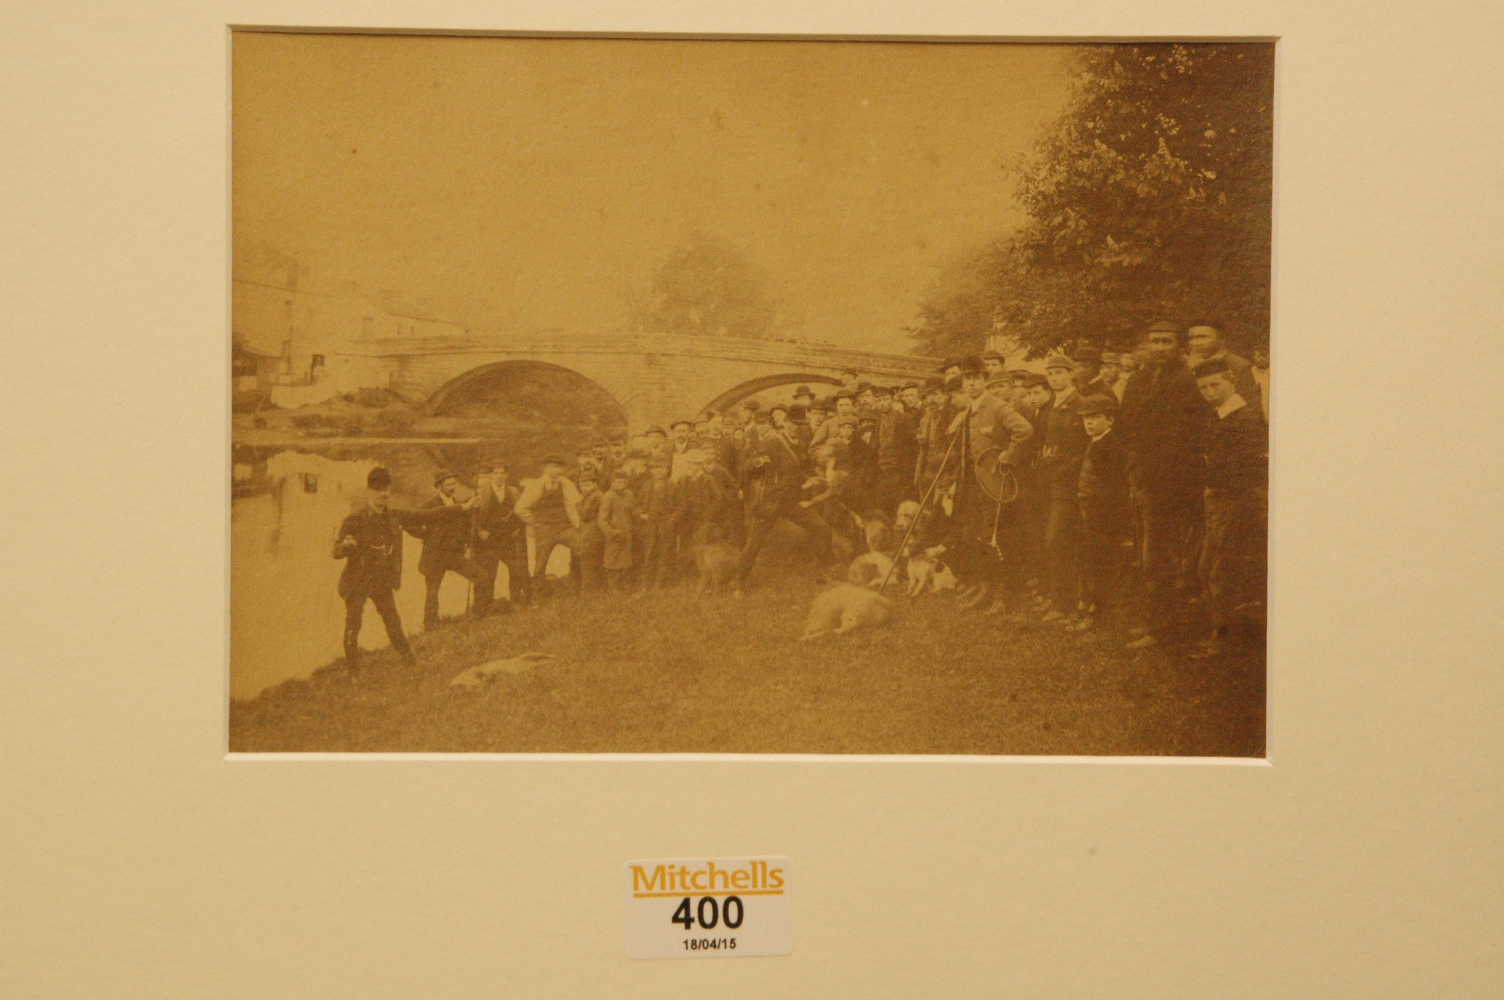 Hunt photograph possibly The Carlisle Otterhounds in Appleby, circa 1860.  15 cm x 21 cm, stamp